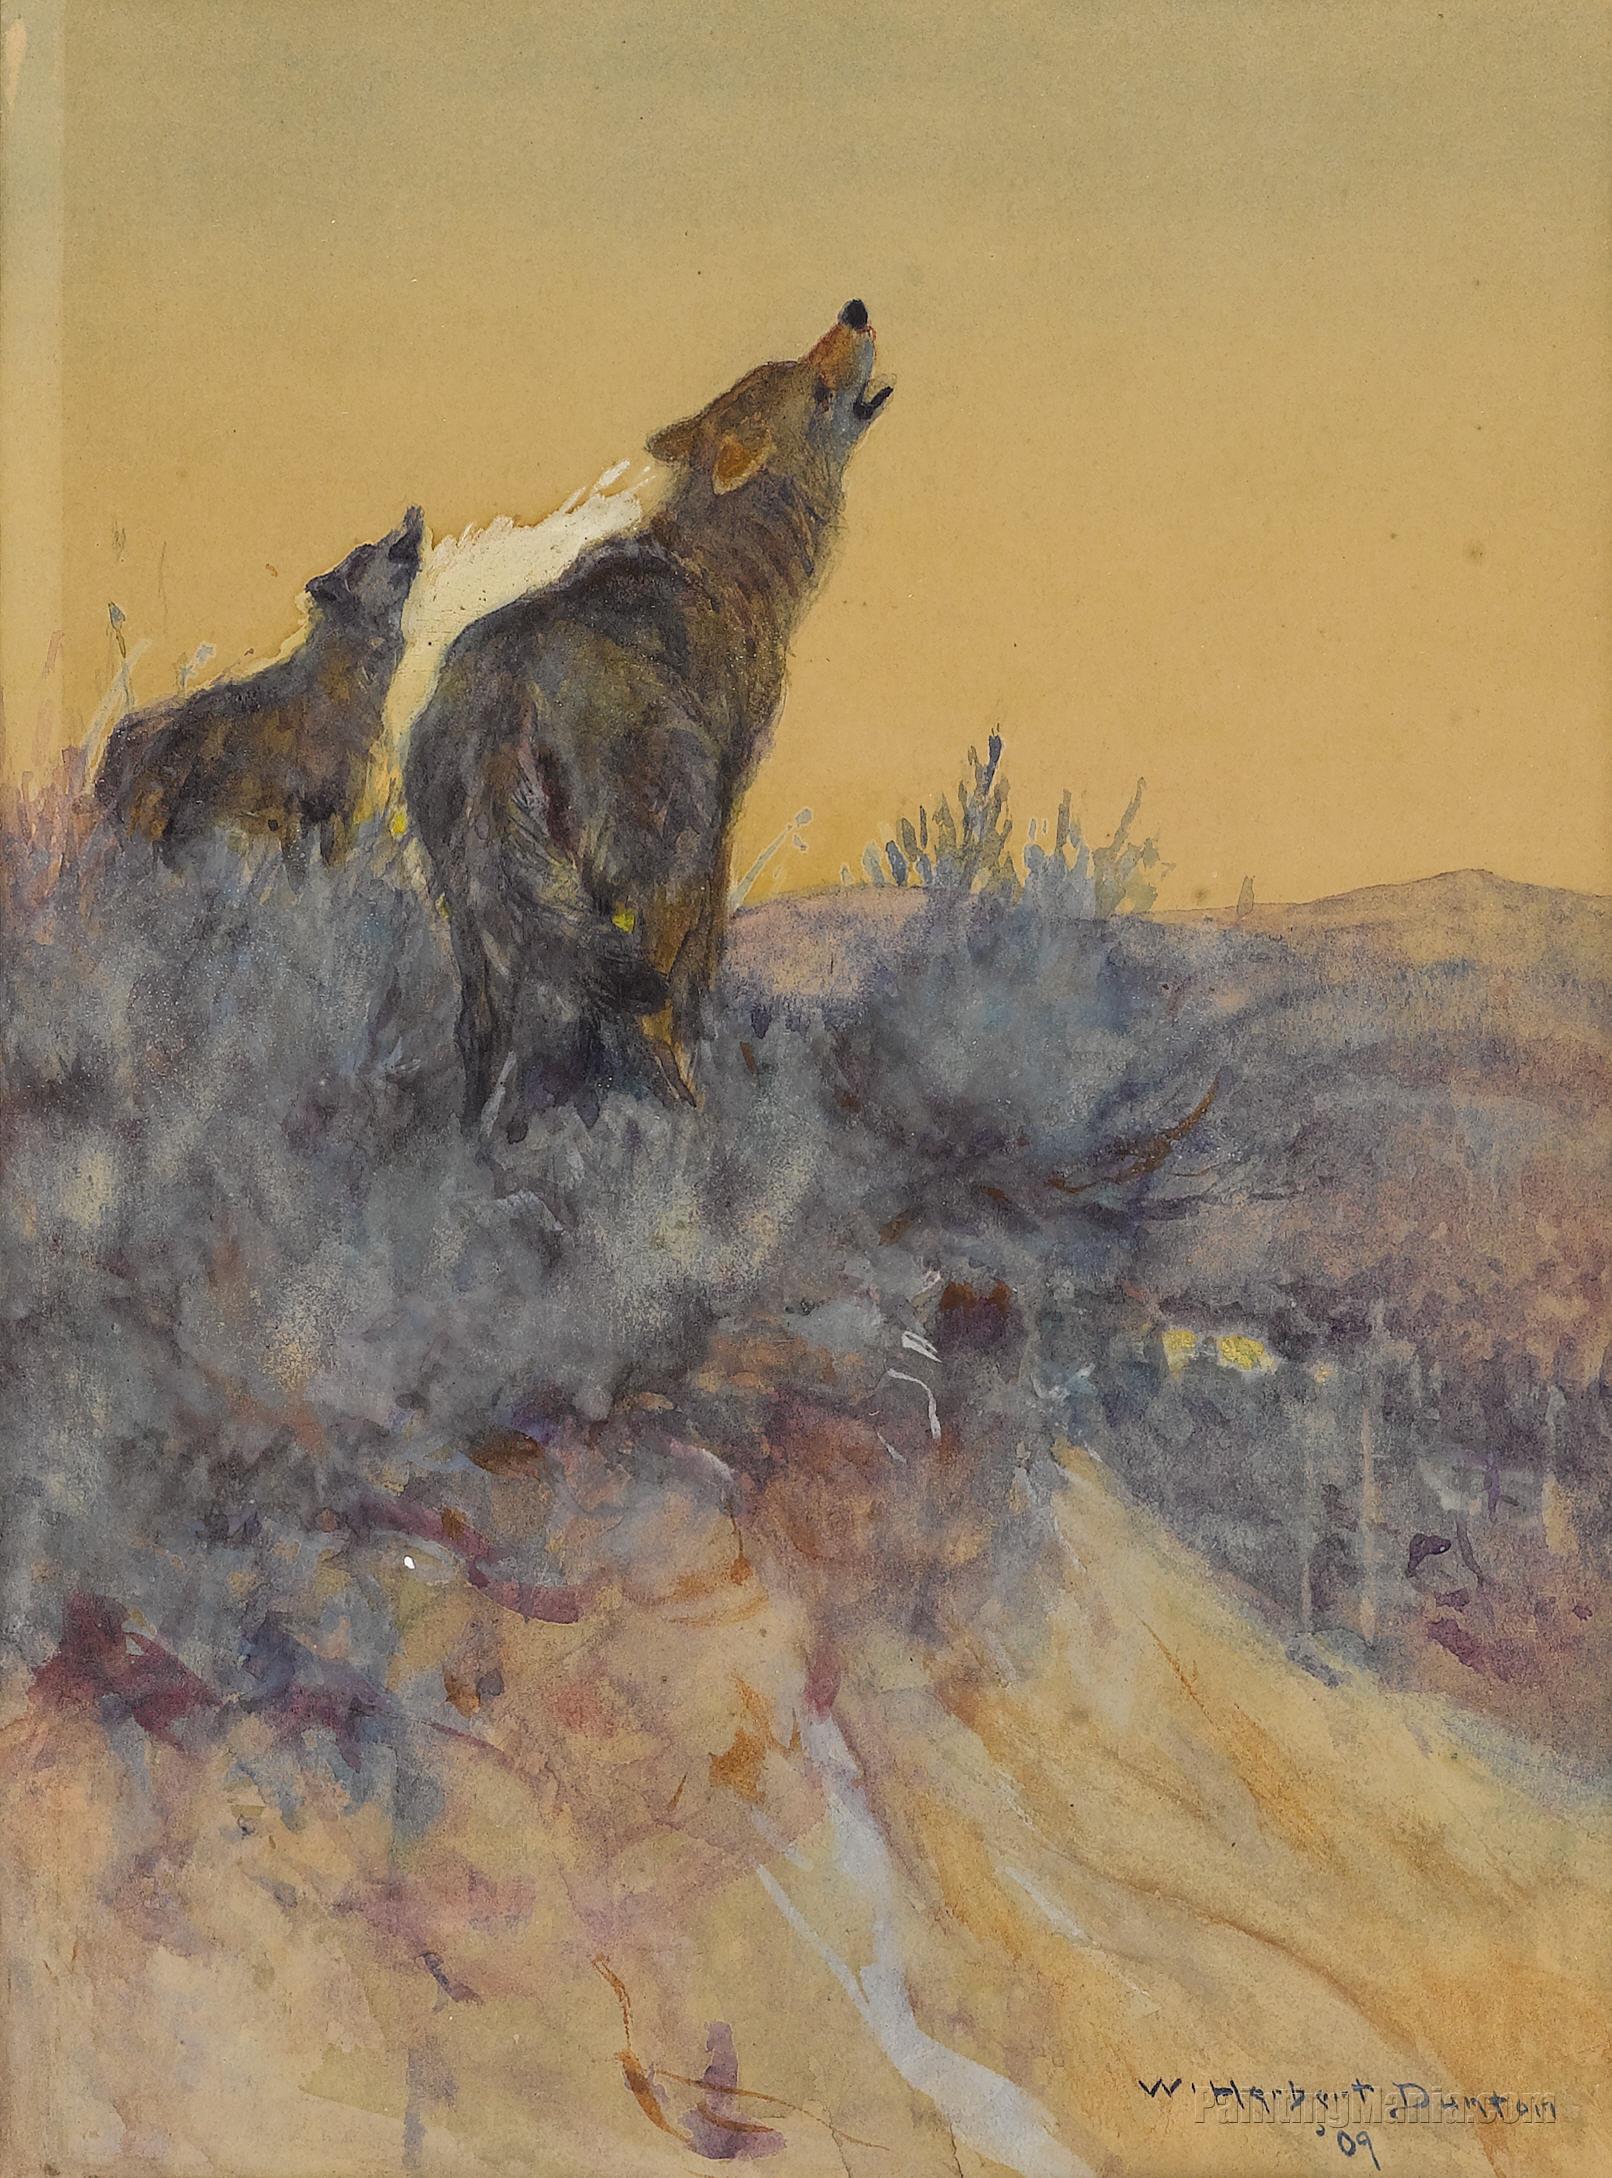 Howling Coyotes